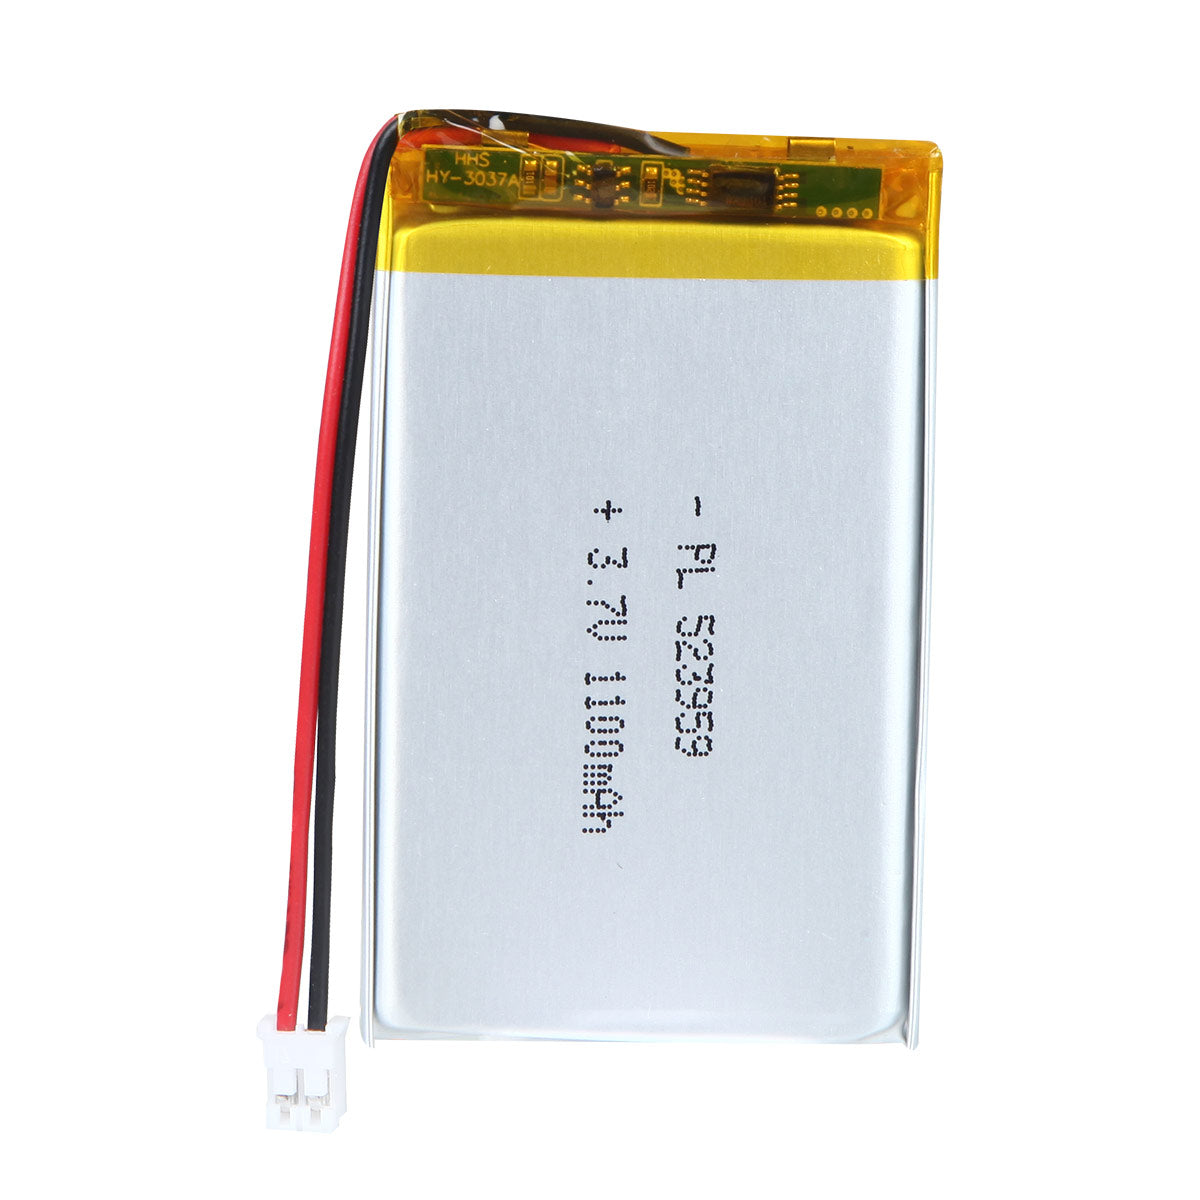 YDL 3.7V 1100mAh 523959 Rechargeable Polymer Lithium-Ion Battery Length 61mm